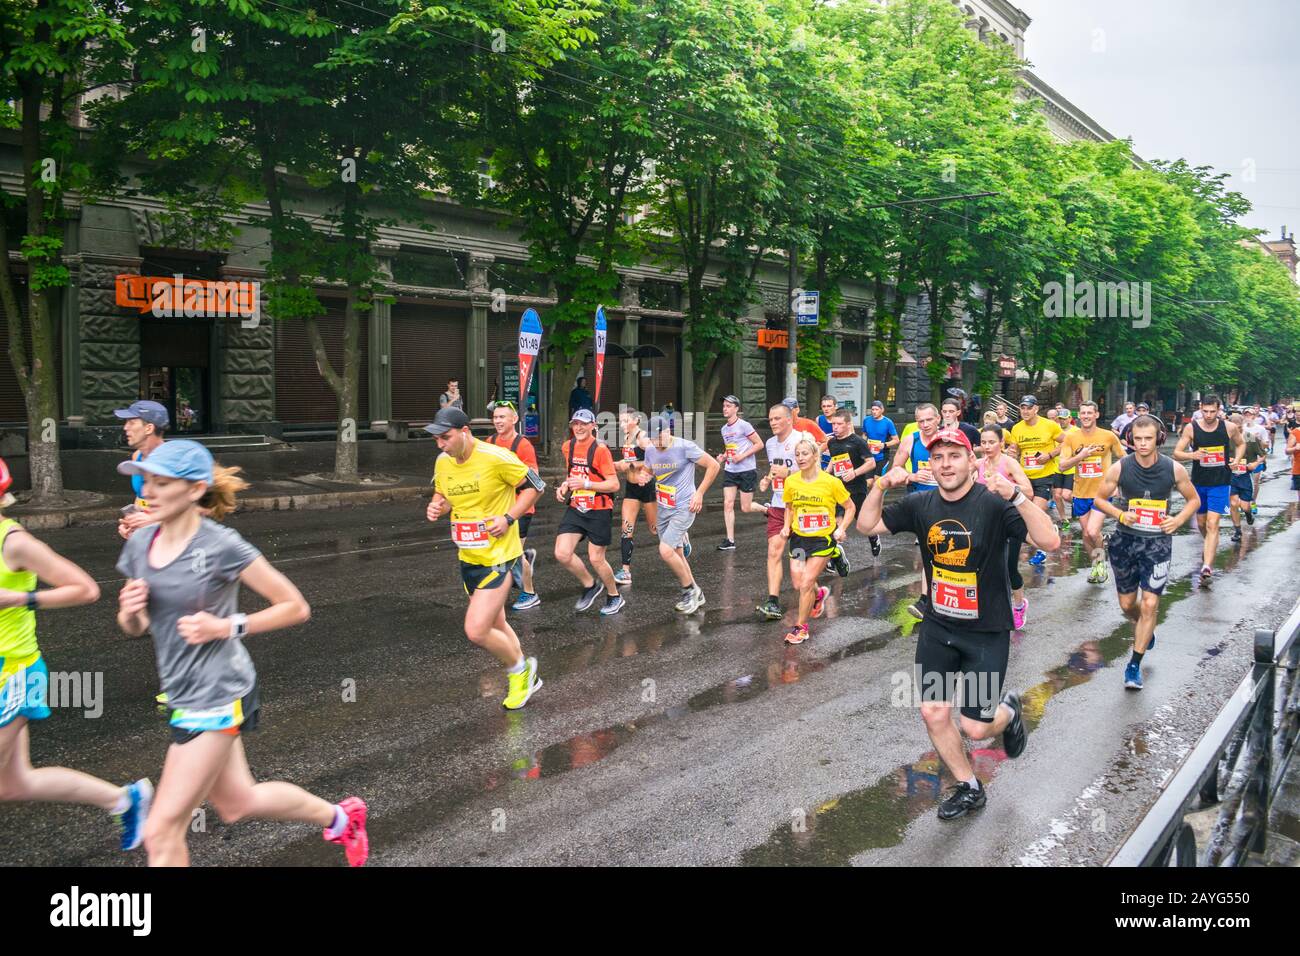 Dnepr, Ukraine - May 20, 2018: Amateur race of city dwellers. Promoting a healthy lifestyle. Stock Photo